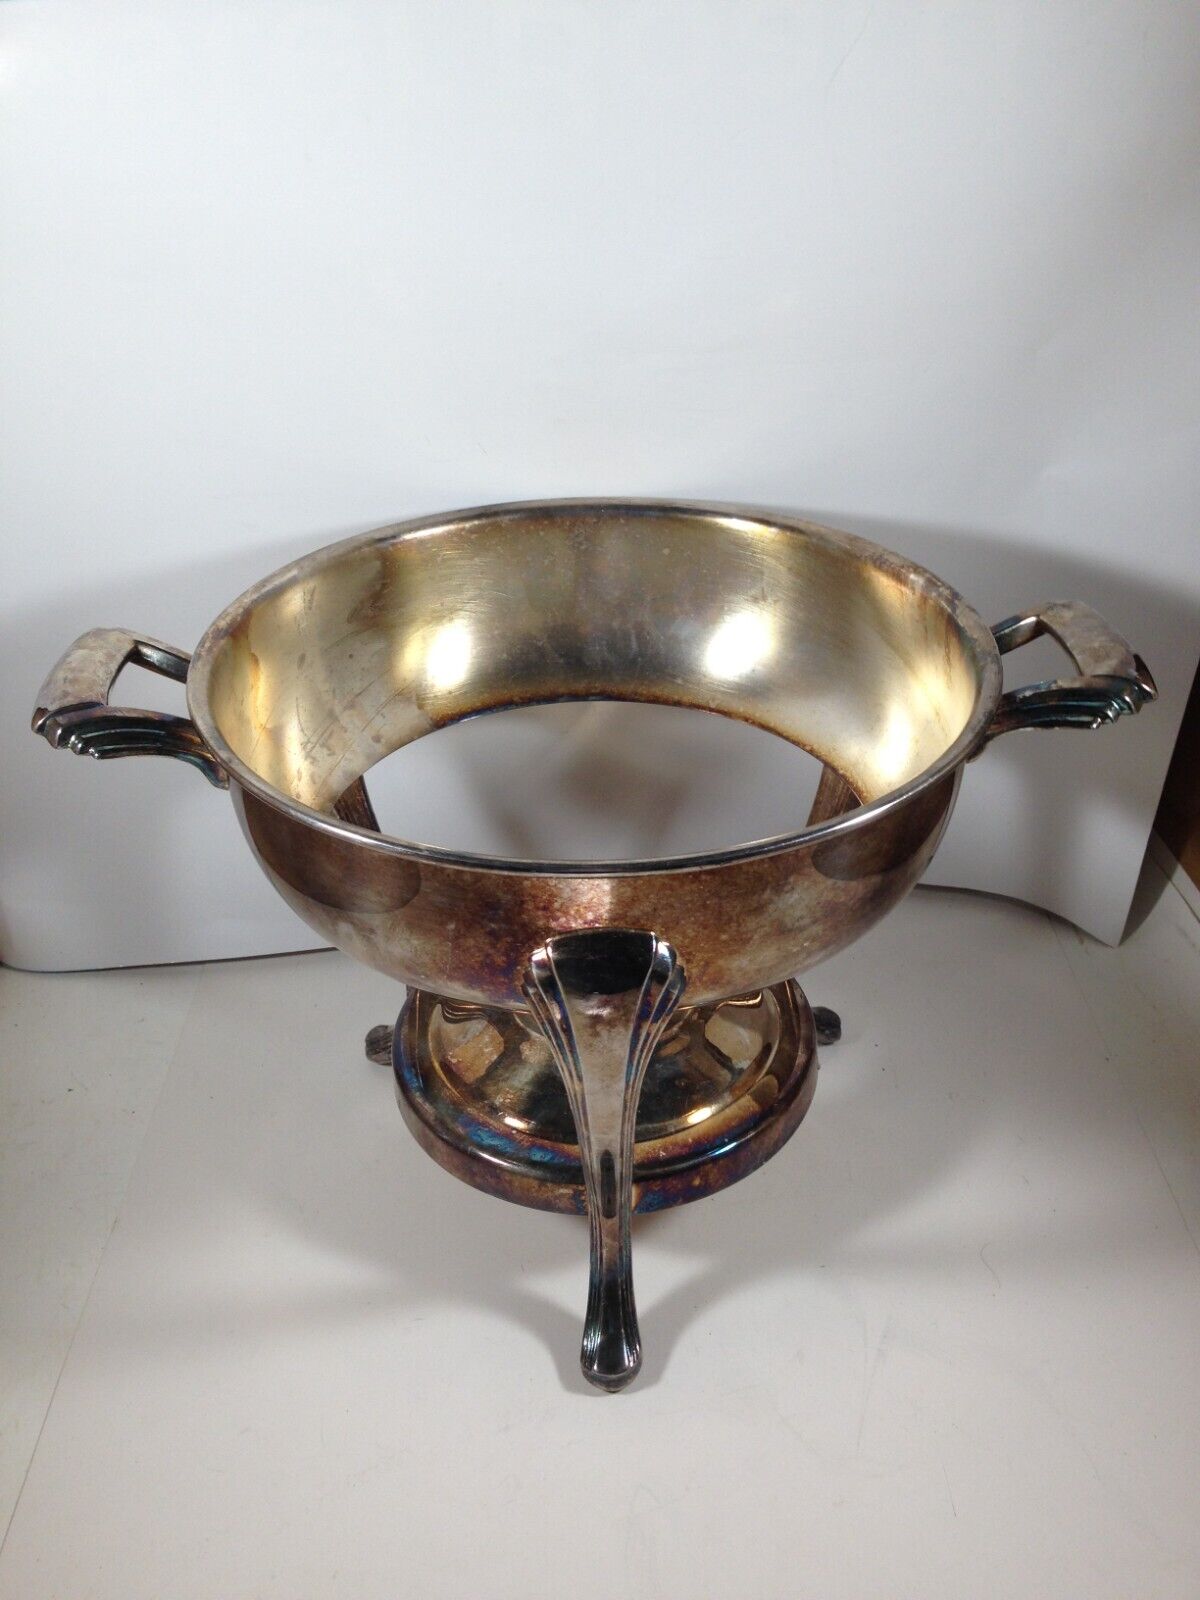 Vintage Silverplate Footed Chaffing Warming Stand Holds Tappered Bowl 8-1/2” - 6